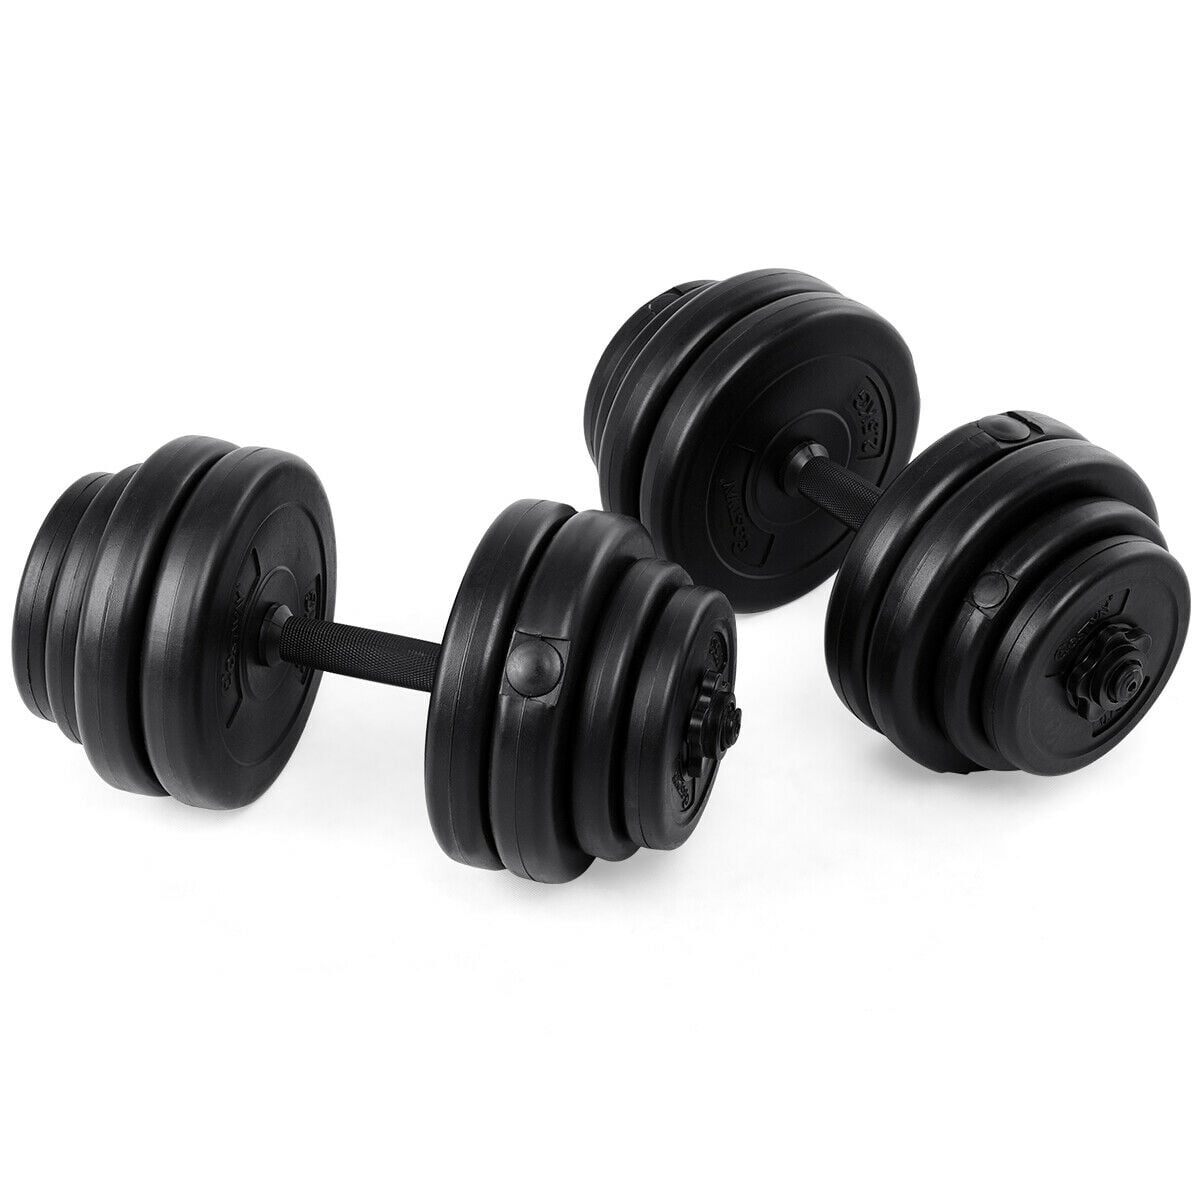 Details about   Totall 110/66 Weight CAP Dumbbell Set Adjustable Gym Barbell Plates Body Workout 